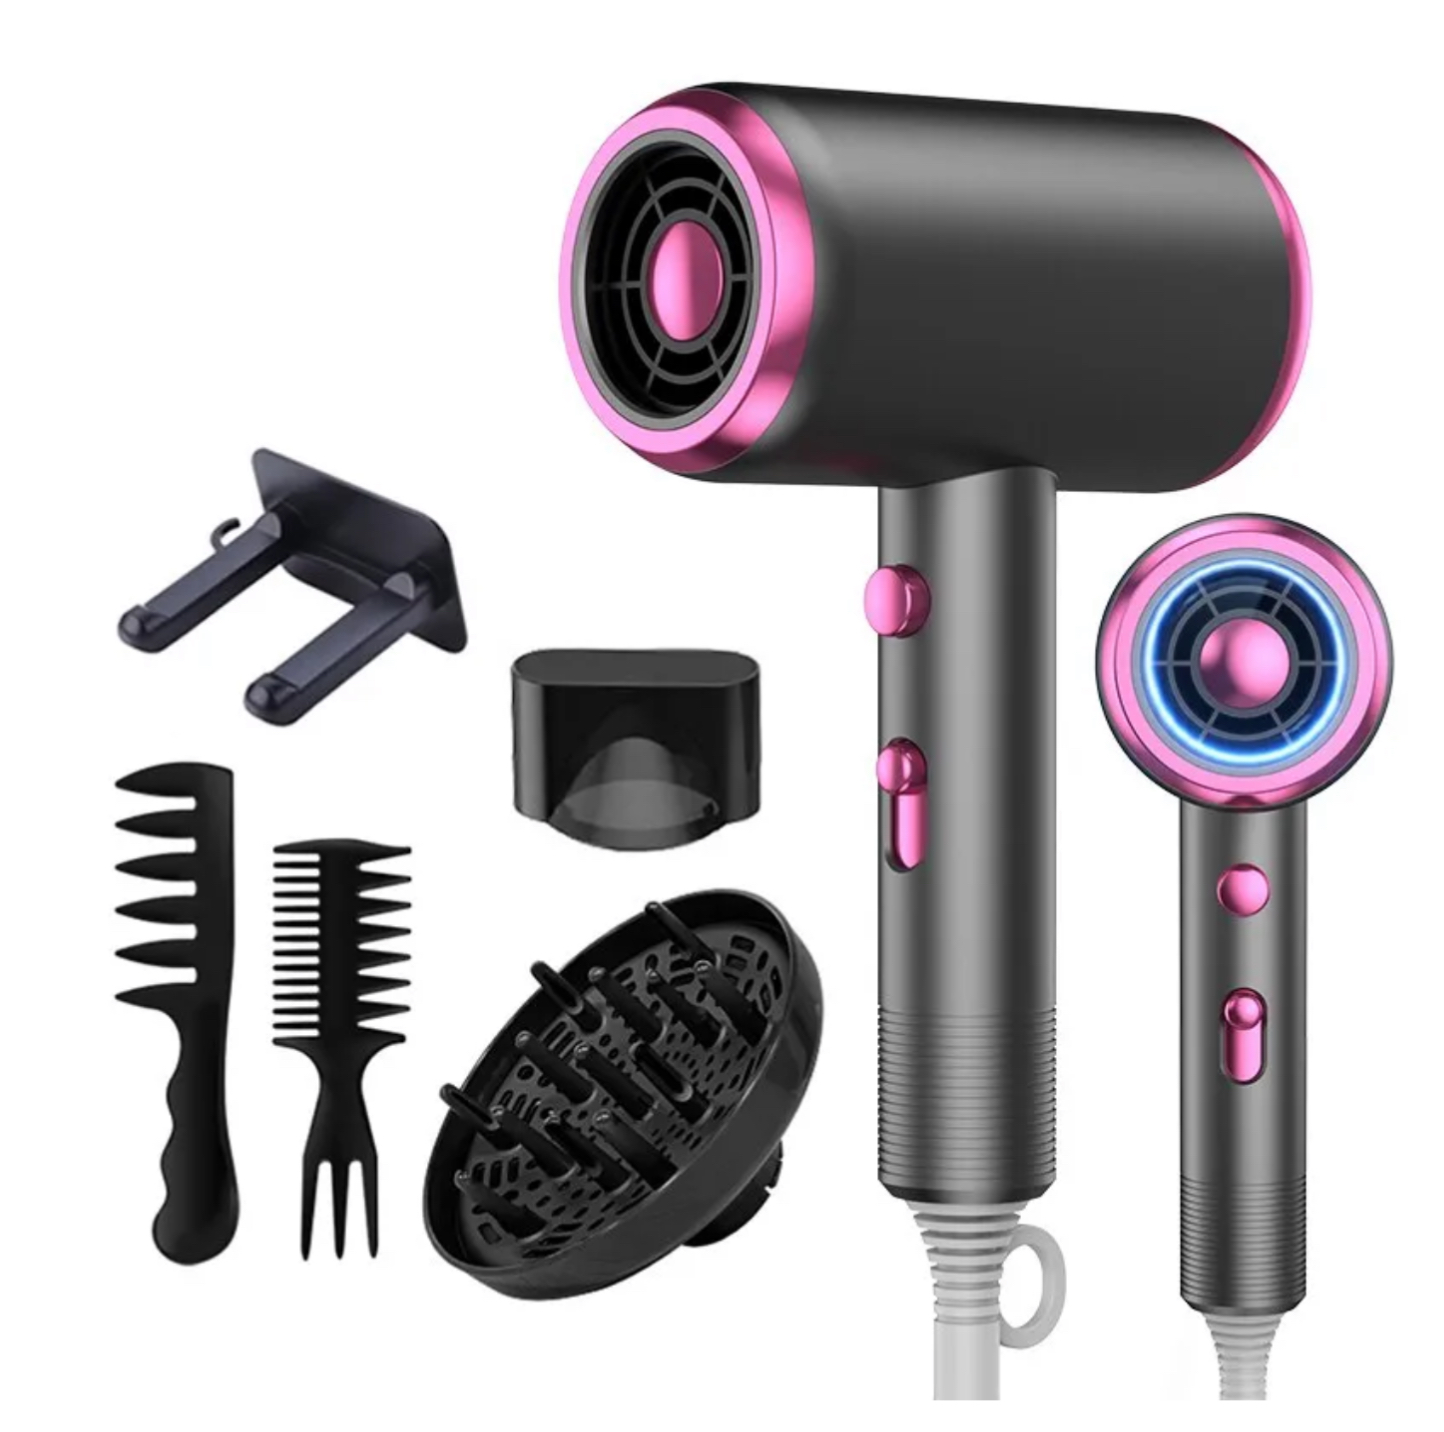 hair dryer with a diffuser is equipped with a blow dryer comb brush and has a power of 1800W. It utilizes ionic technology, ensuring constant temperature and providing hair care without causing damage.